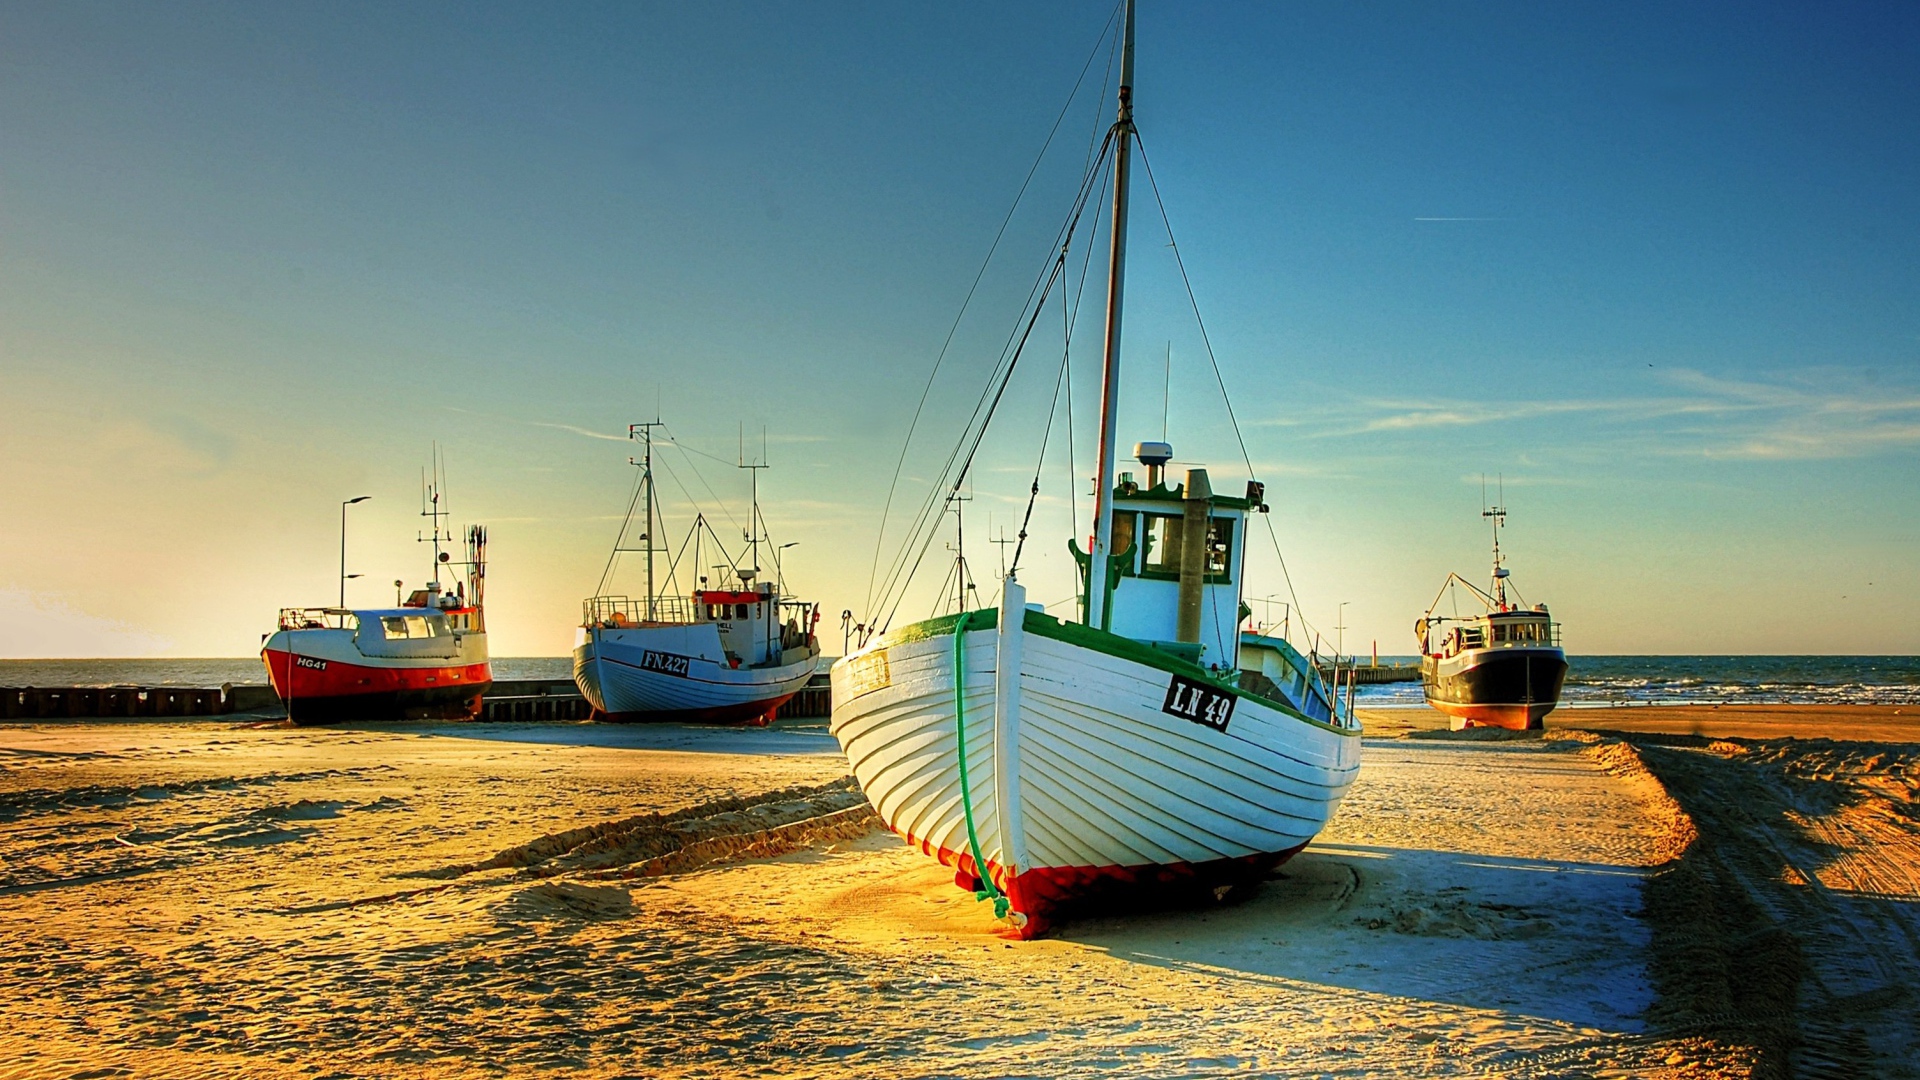 Fishing boats in the sun on the shore